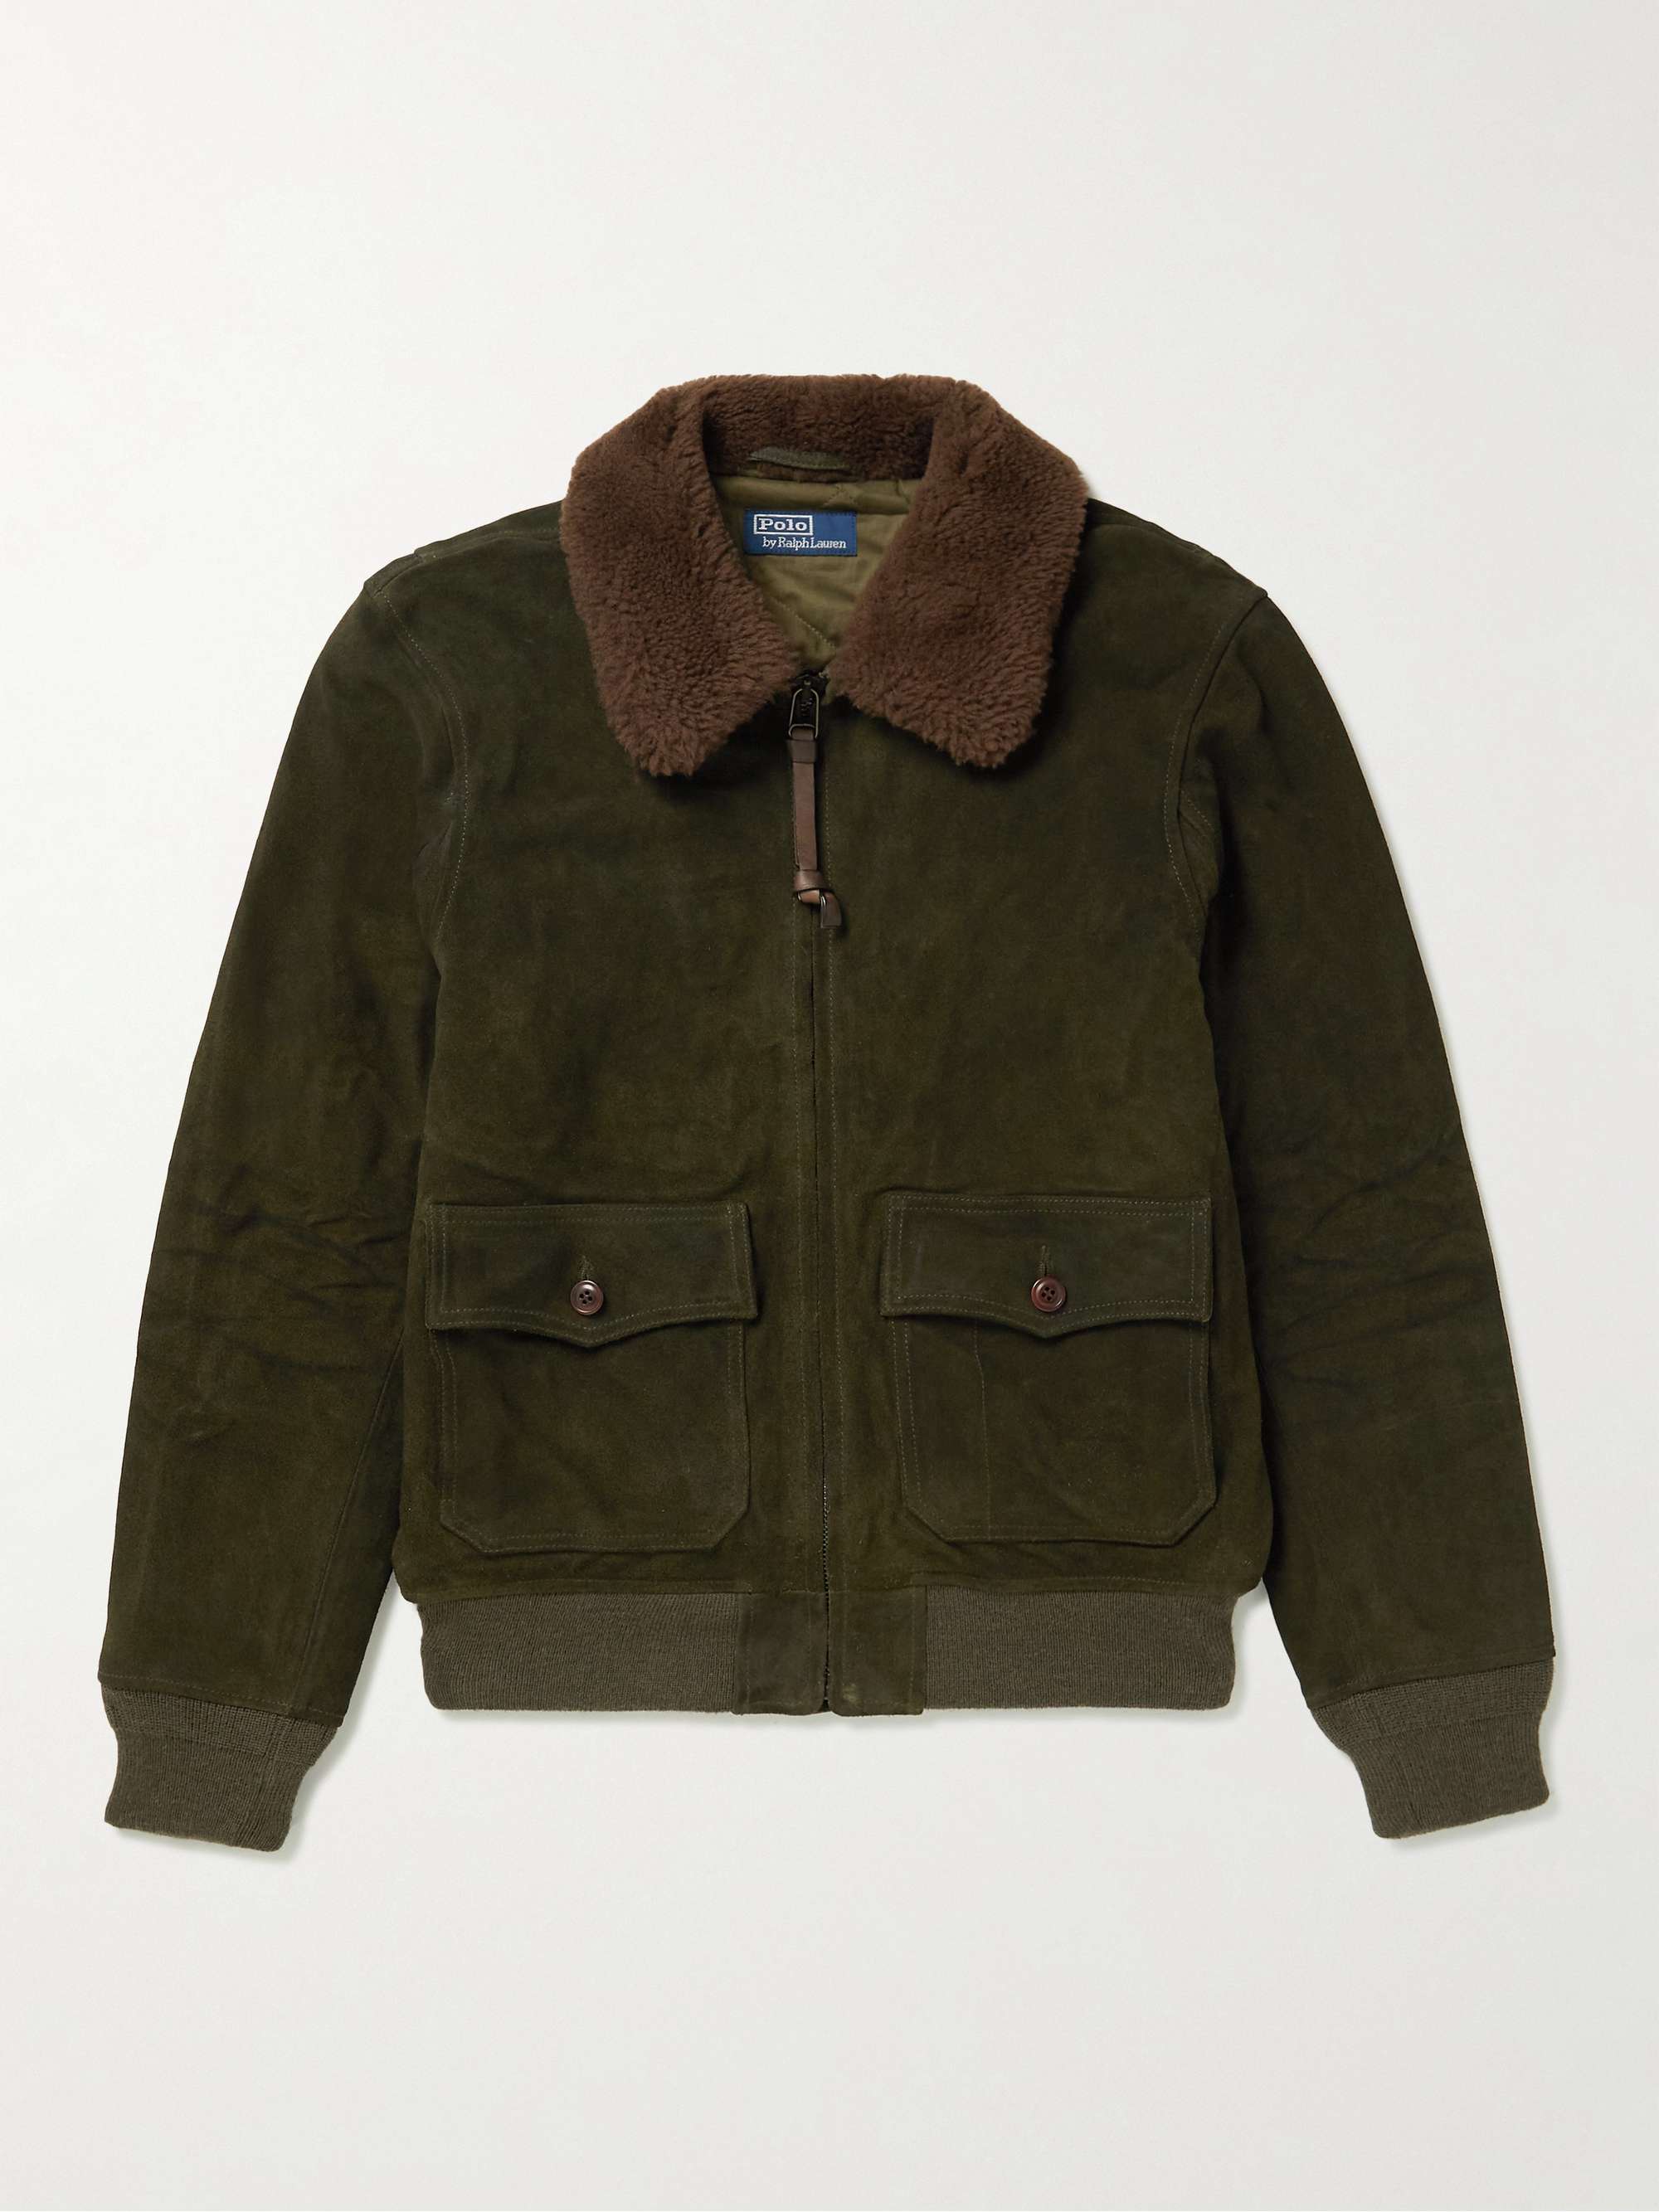 POLO RALPH LAUREN Shearling-Trimmed Suede Bomber Jacket